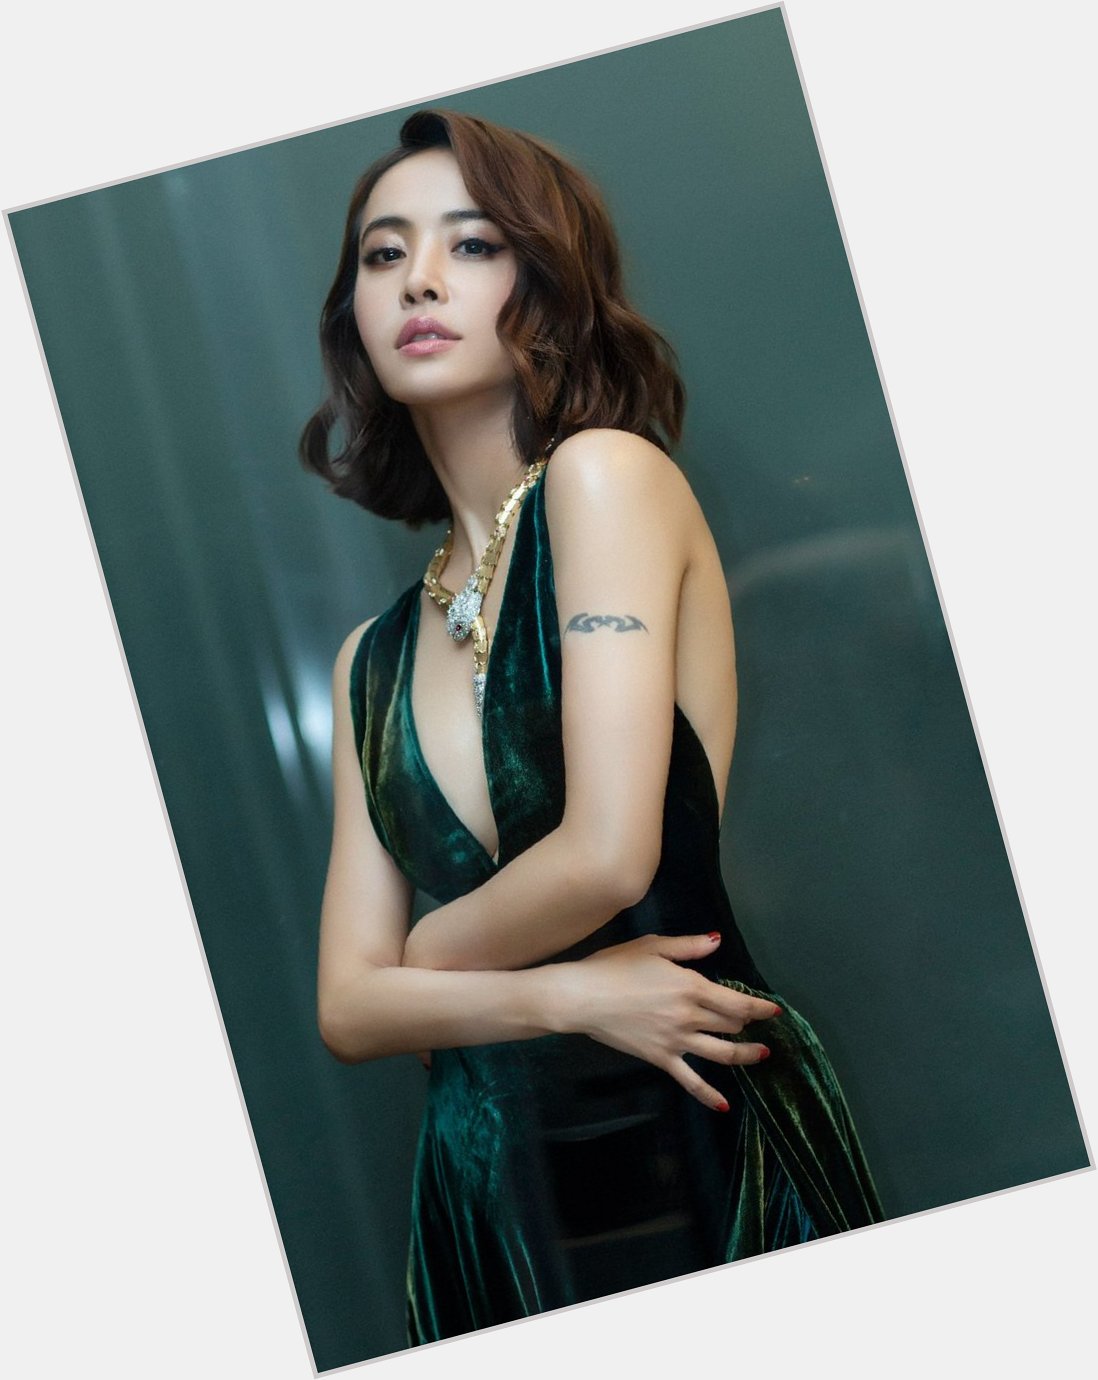 Happy 39th birthday and 20 years since debut to the beautiful Queen of Cpop Jolin Tsai   